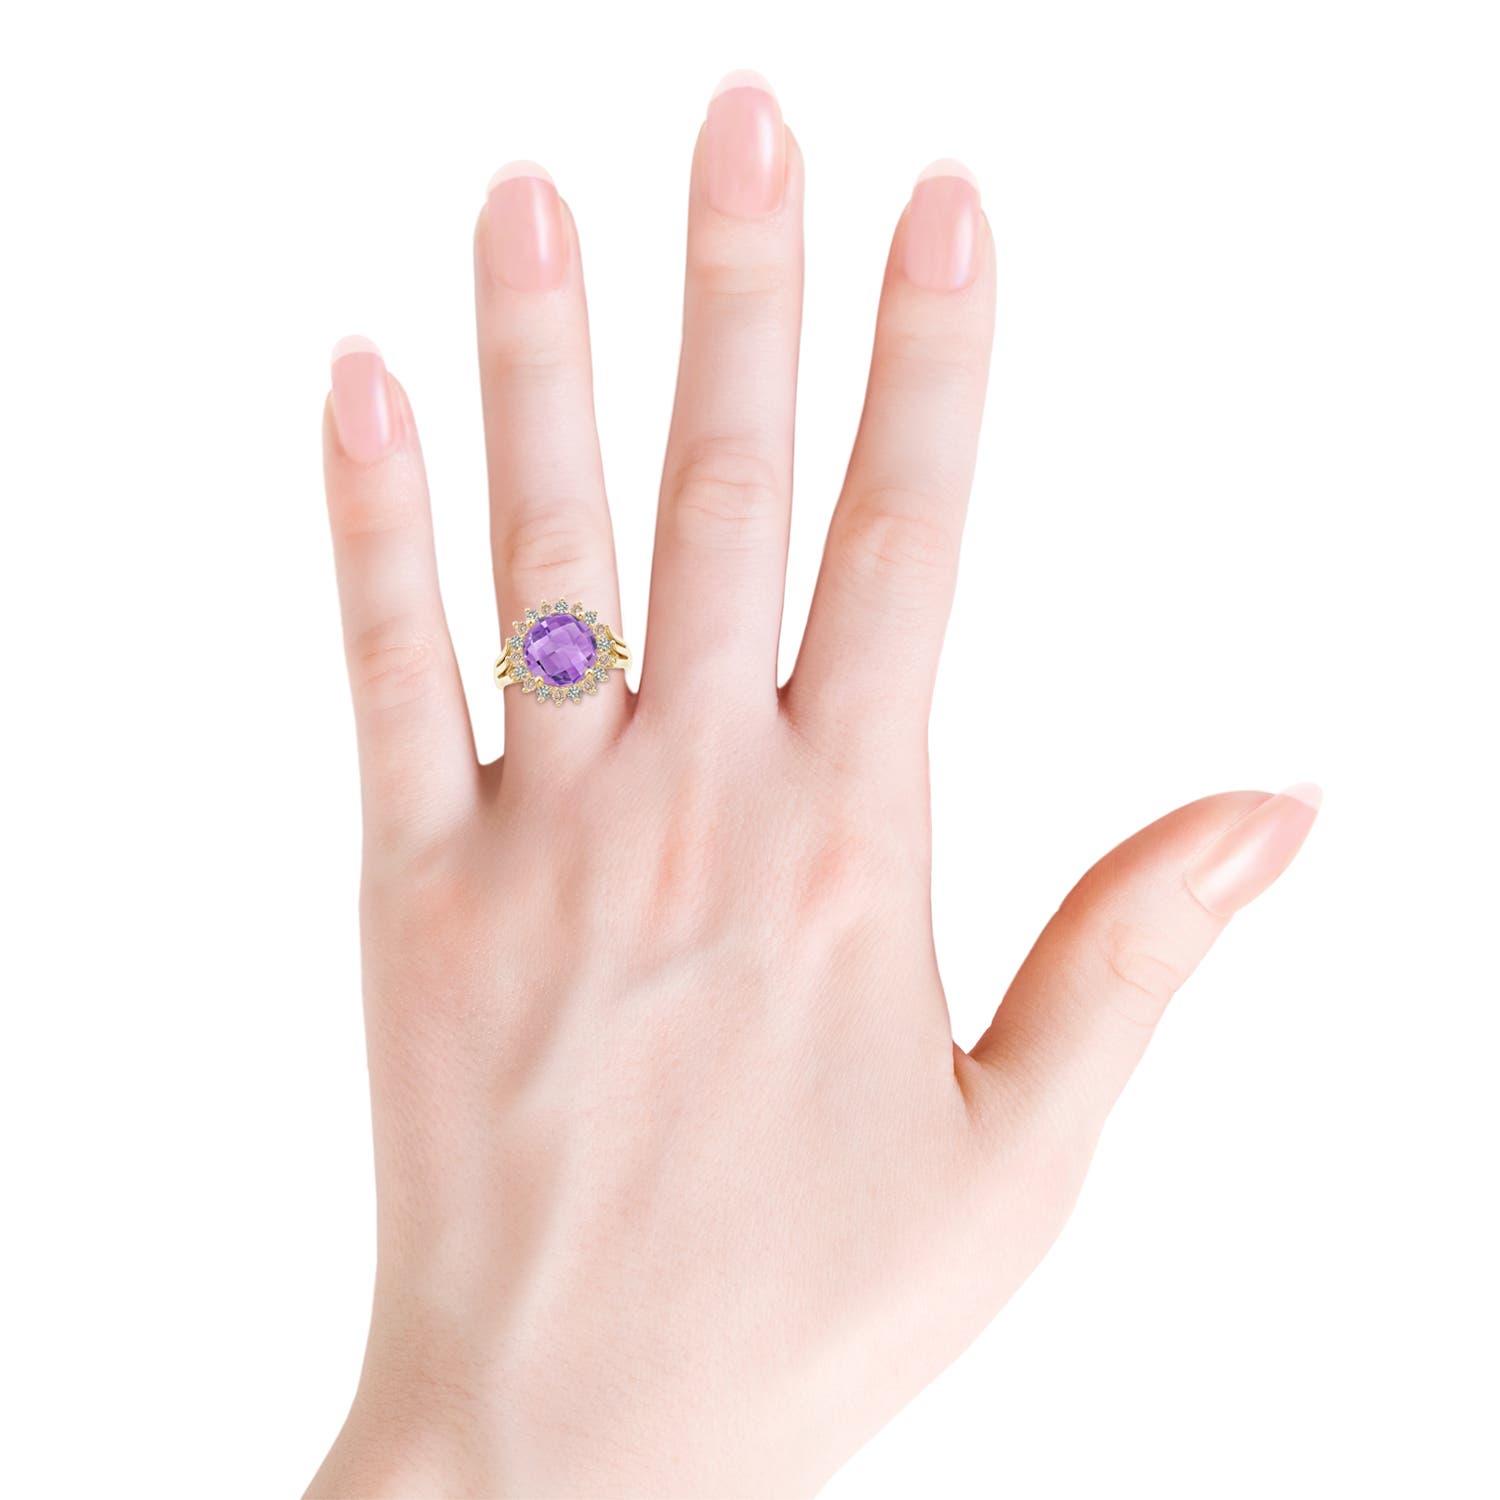 A - Amethyst / 4.17 CT / 14 KT Yellow Gold